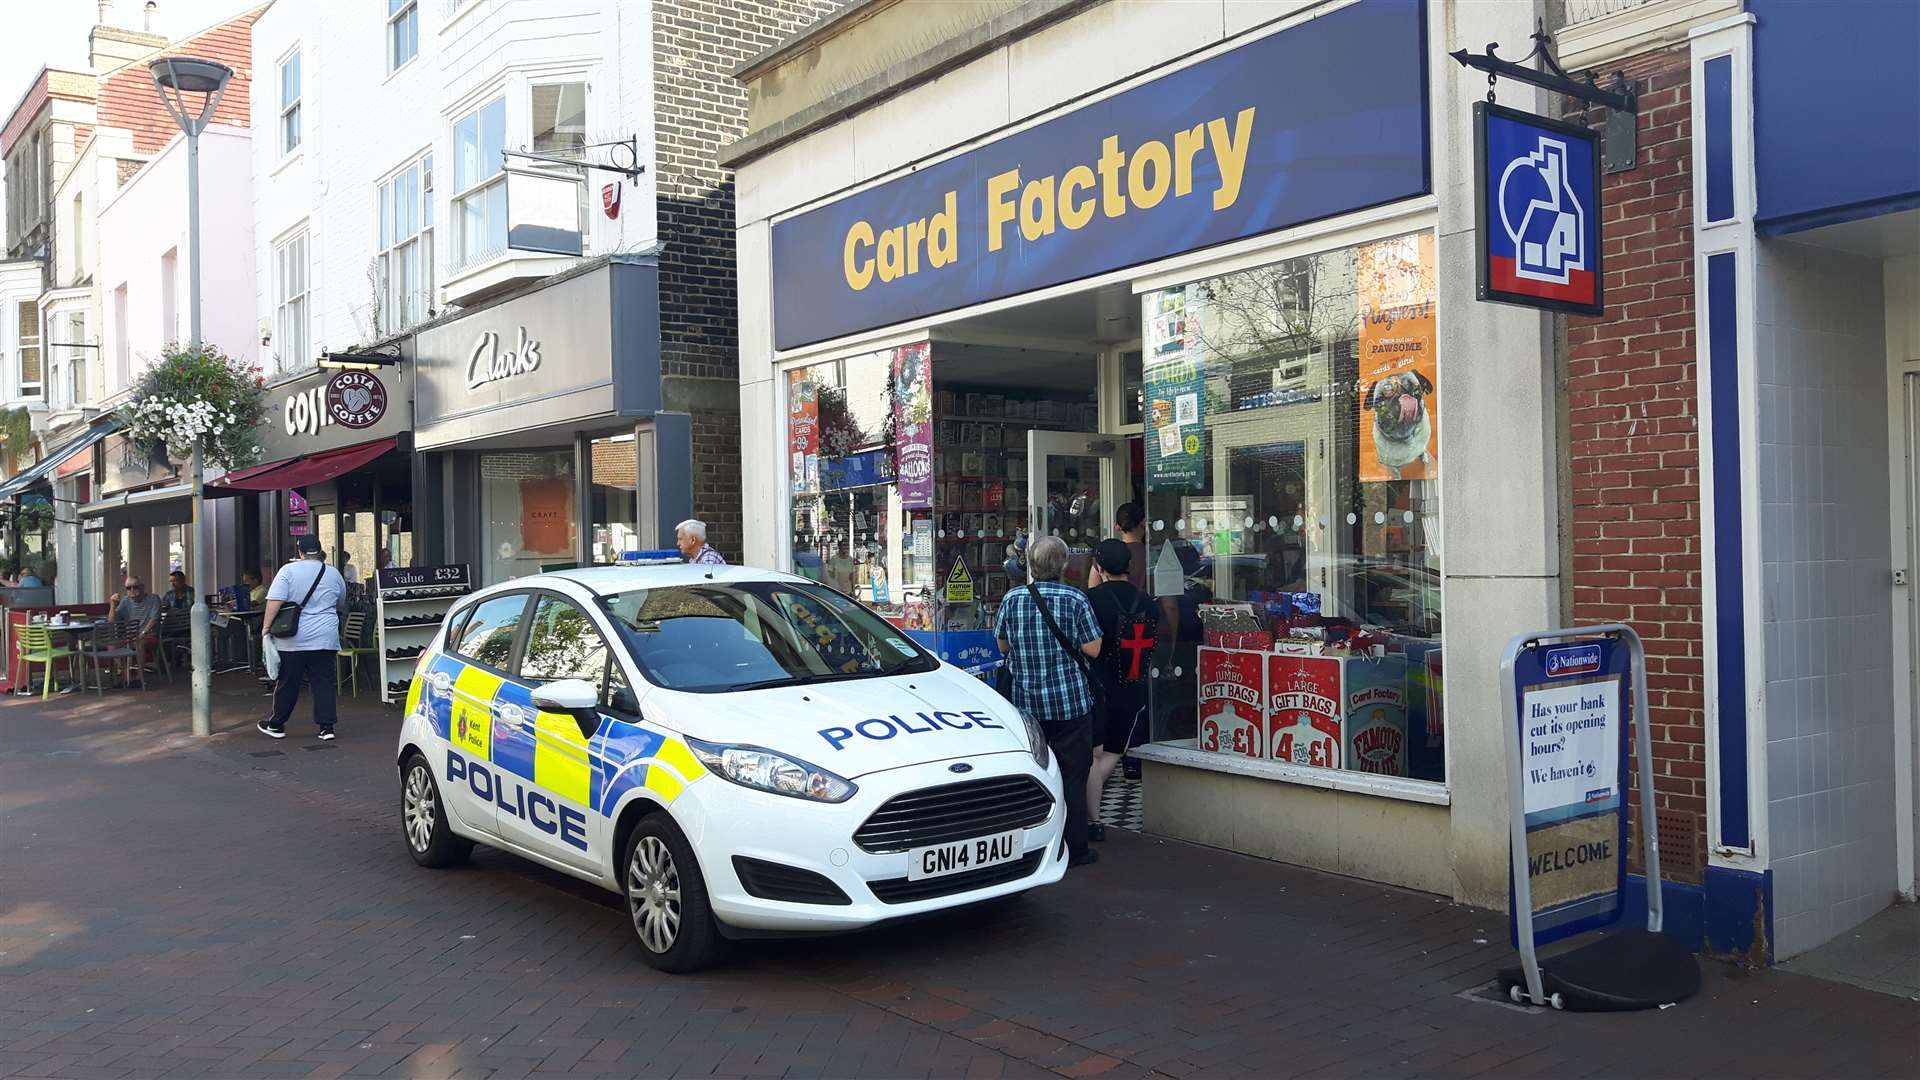 Burglary at Card Factory in the High Street